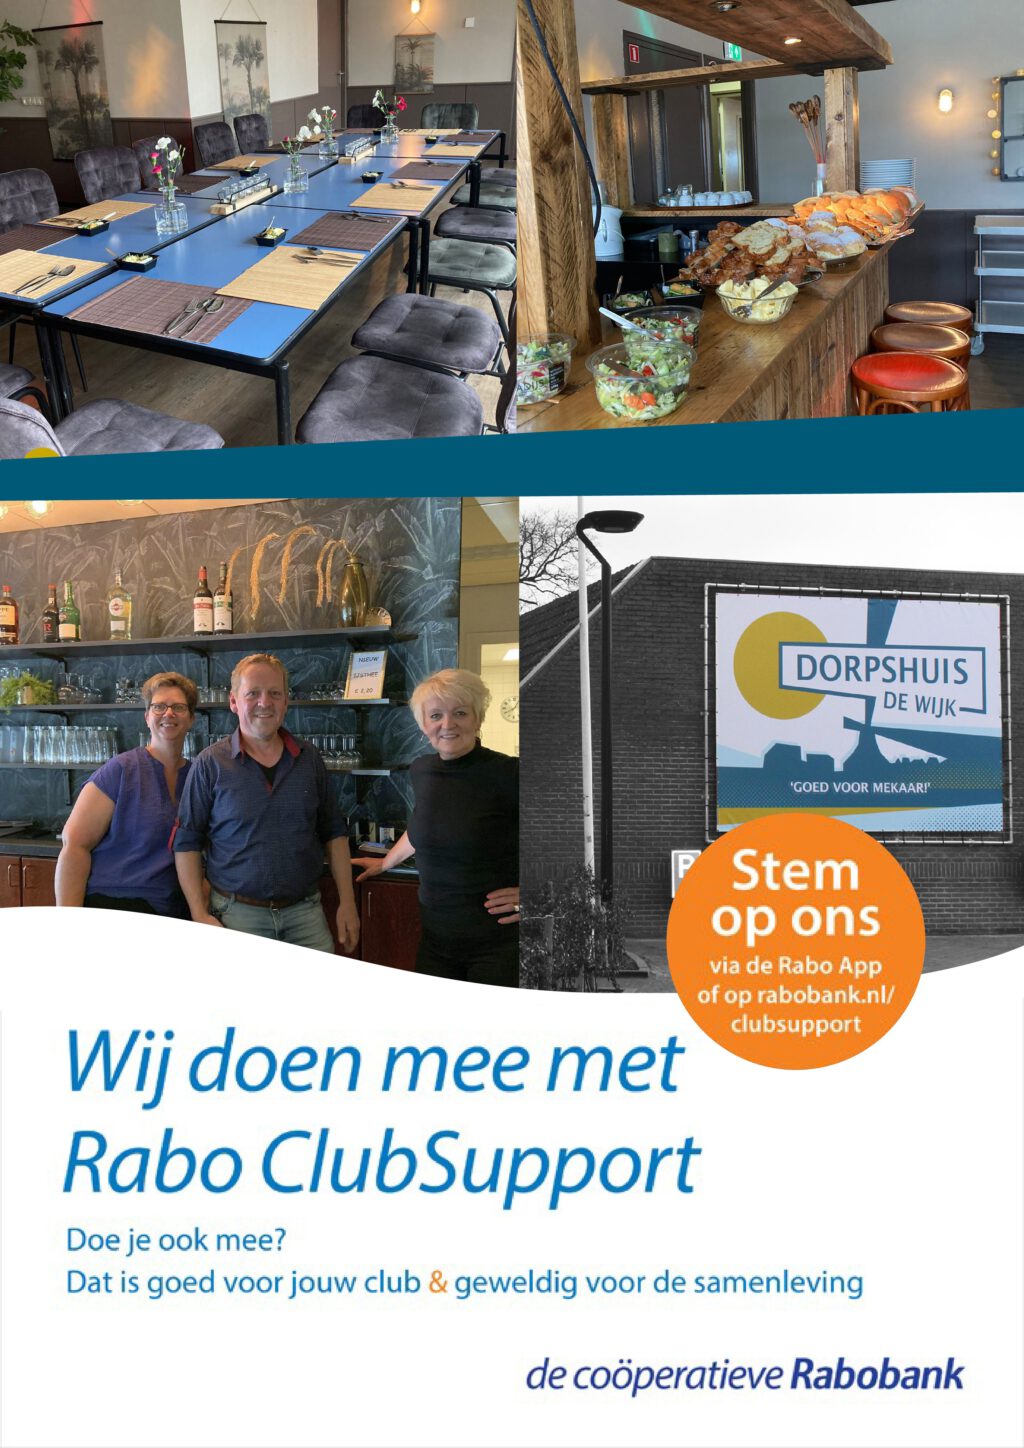 Rabo clubsupport, stem op ons